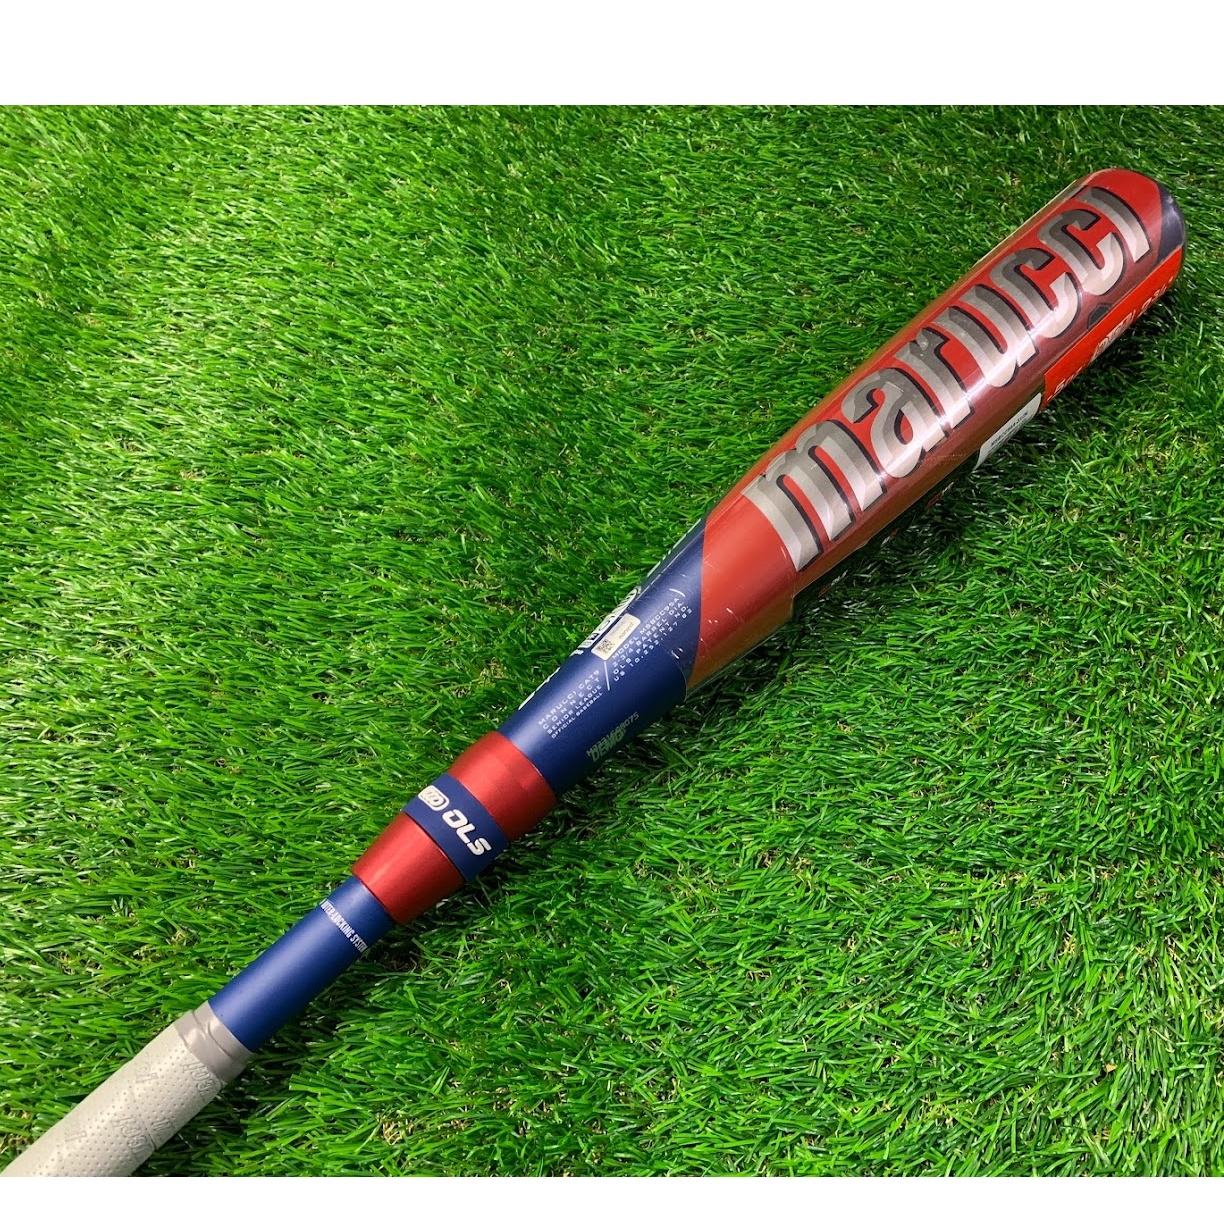 marucci-cat-9-connect-5-pastime-baseball-bat-31-inch-26-oz-demo MSBCC95-3126-DEMO Marucci  Demo bats are a great opportunity to pick up a high